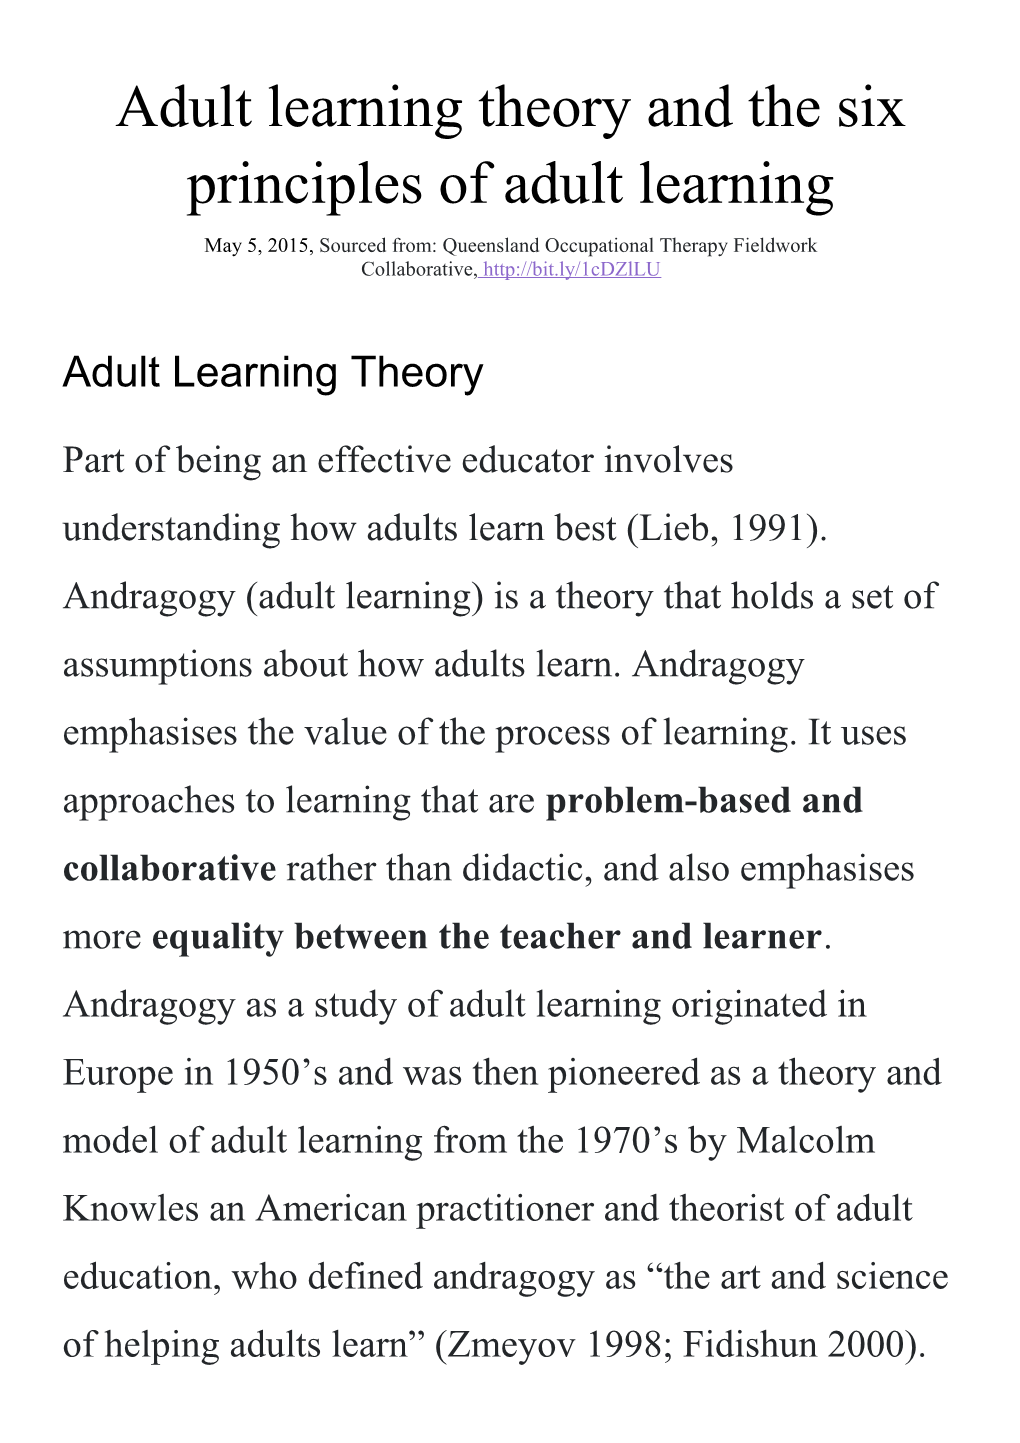 Adult Learning Theory and the Six Principles of Adult Learning